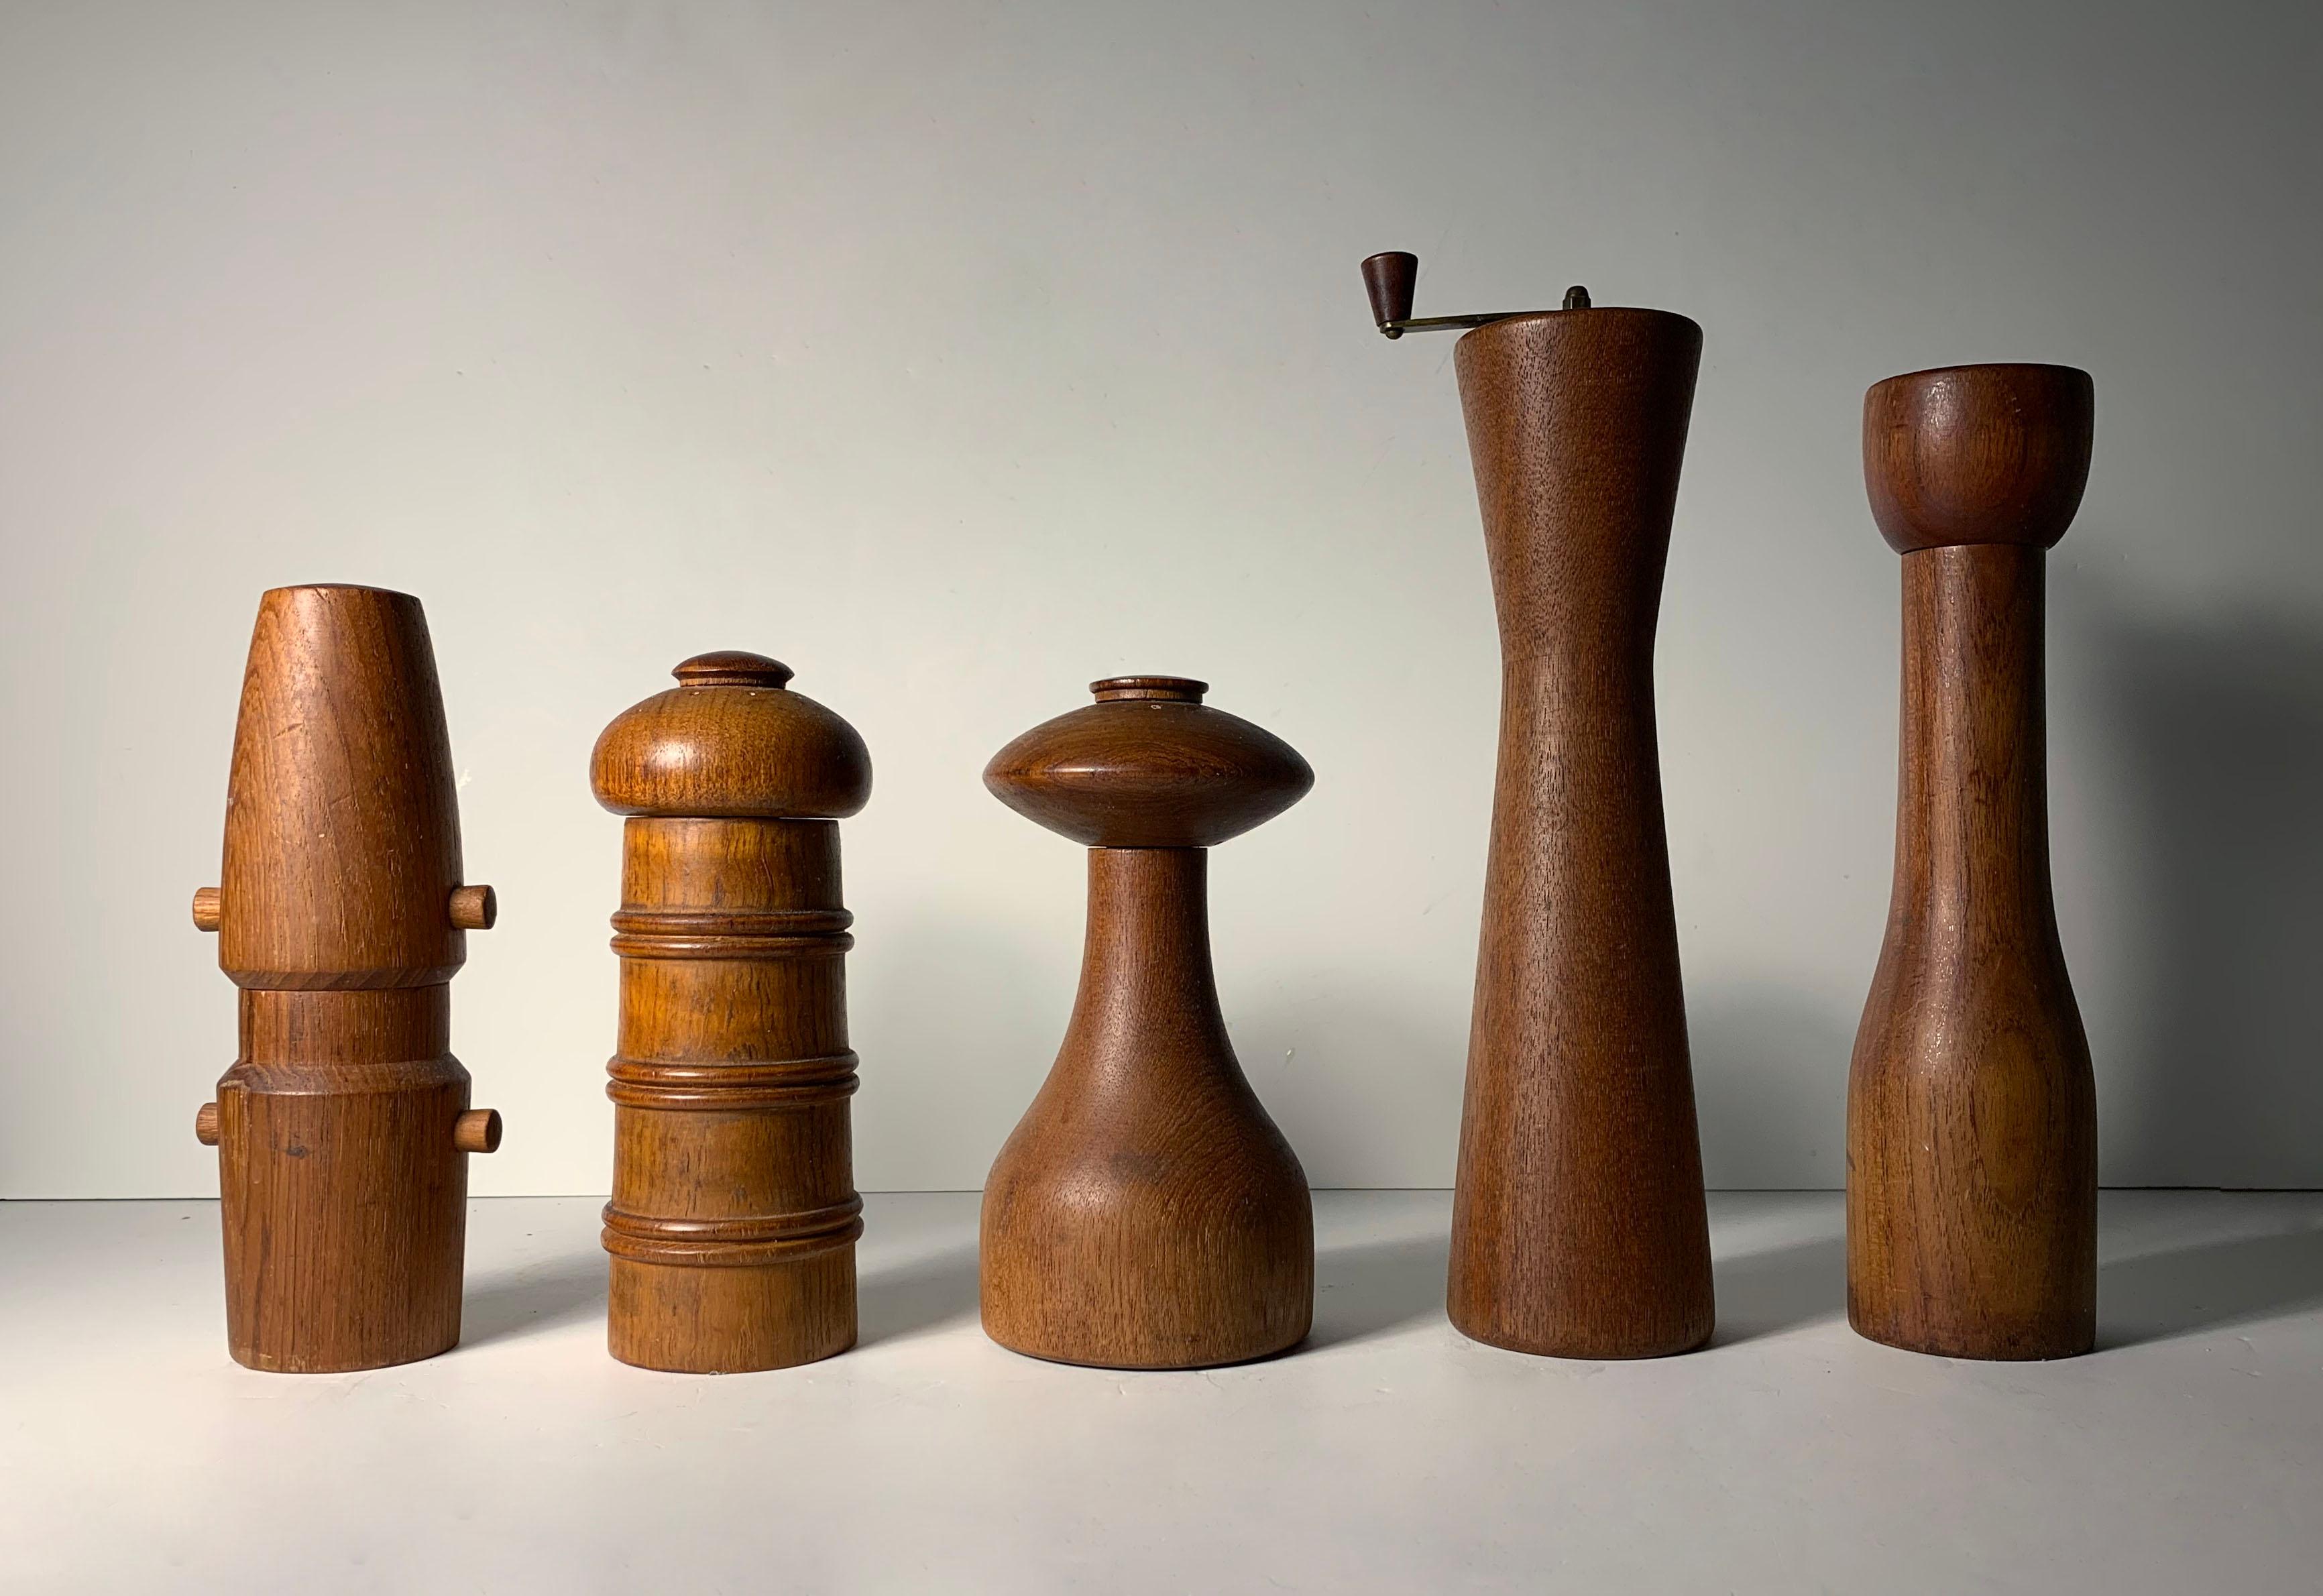 Assortment of 5 vintage salt pepper mills grinder Dansk Denmark Jens Quistgaard 

1 Mill made in England. Not certain who designed this one.
The other 4 made in Denmark. 3 of them for sure Designed by Jens Quistgaard. The tall one I believe is